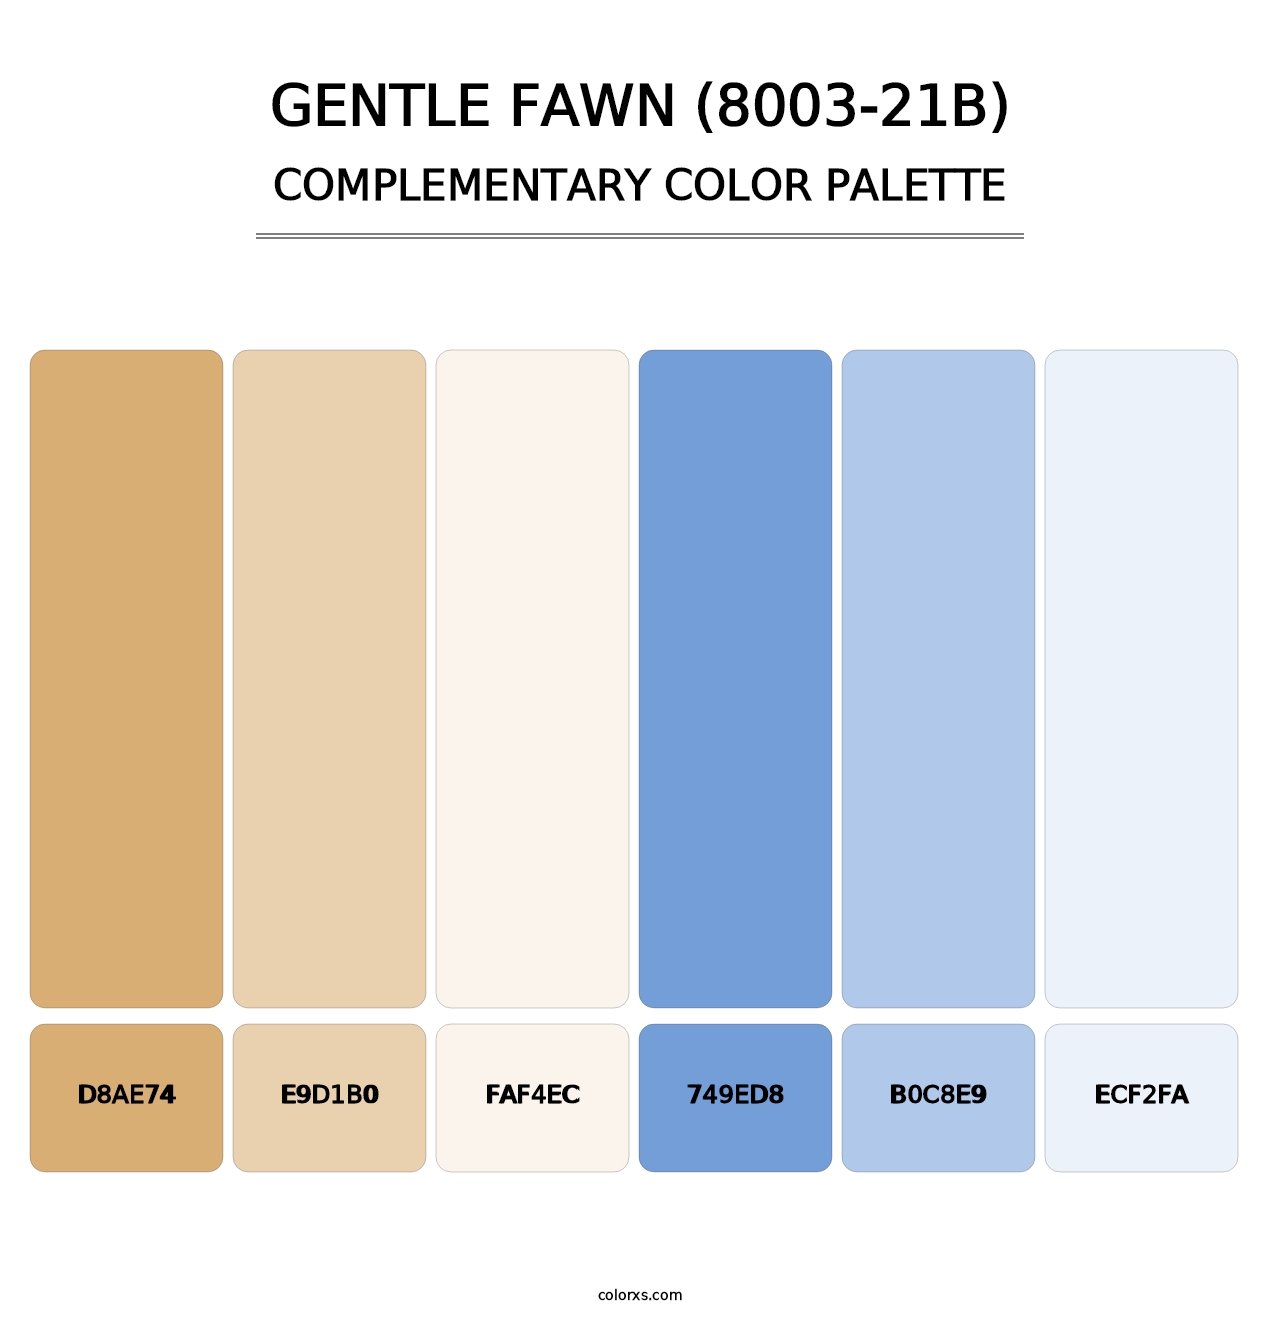 Gentle Fawn (8003-21B) - Complementary Color Palette